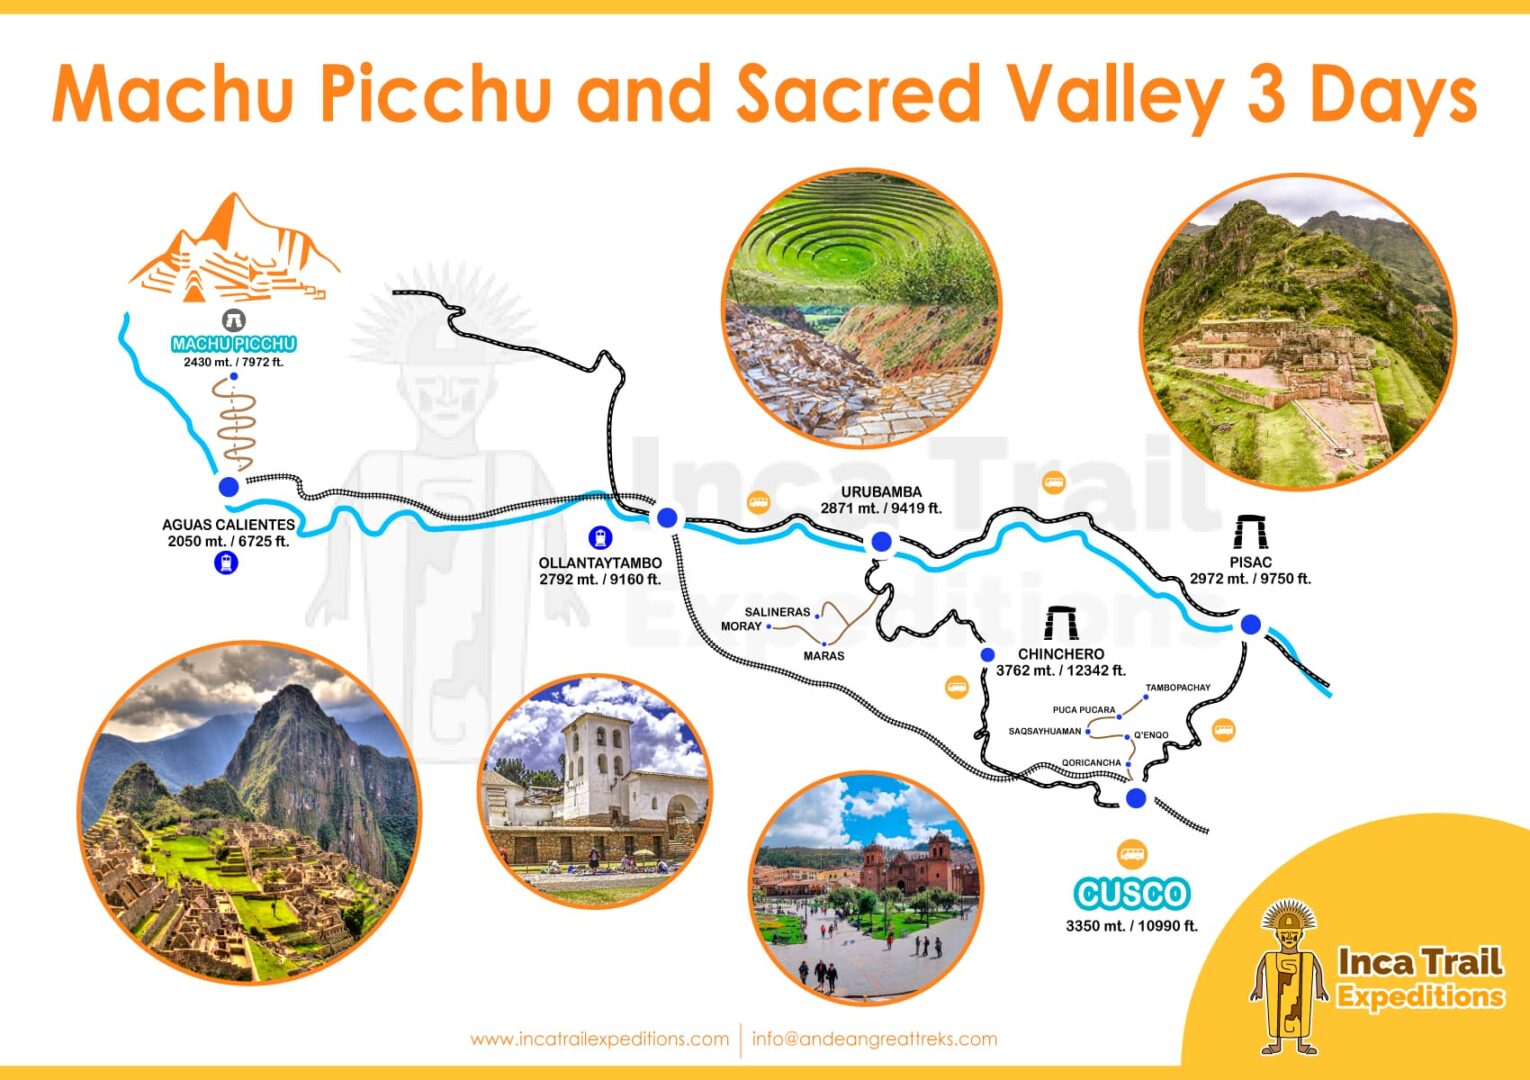 MACHU-PICCHU-AND-SACRED-VALLEY-3-DAYS-BY-INCA-TRAIL-EXPEDITIONS